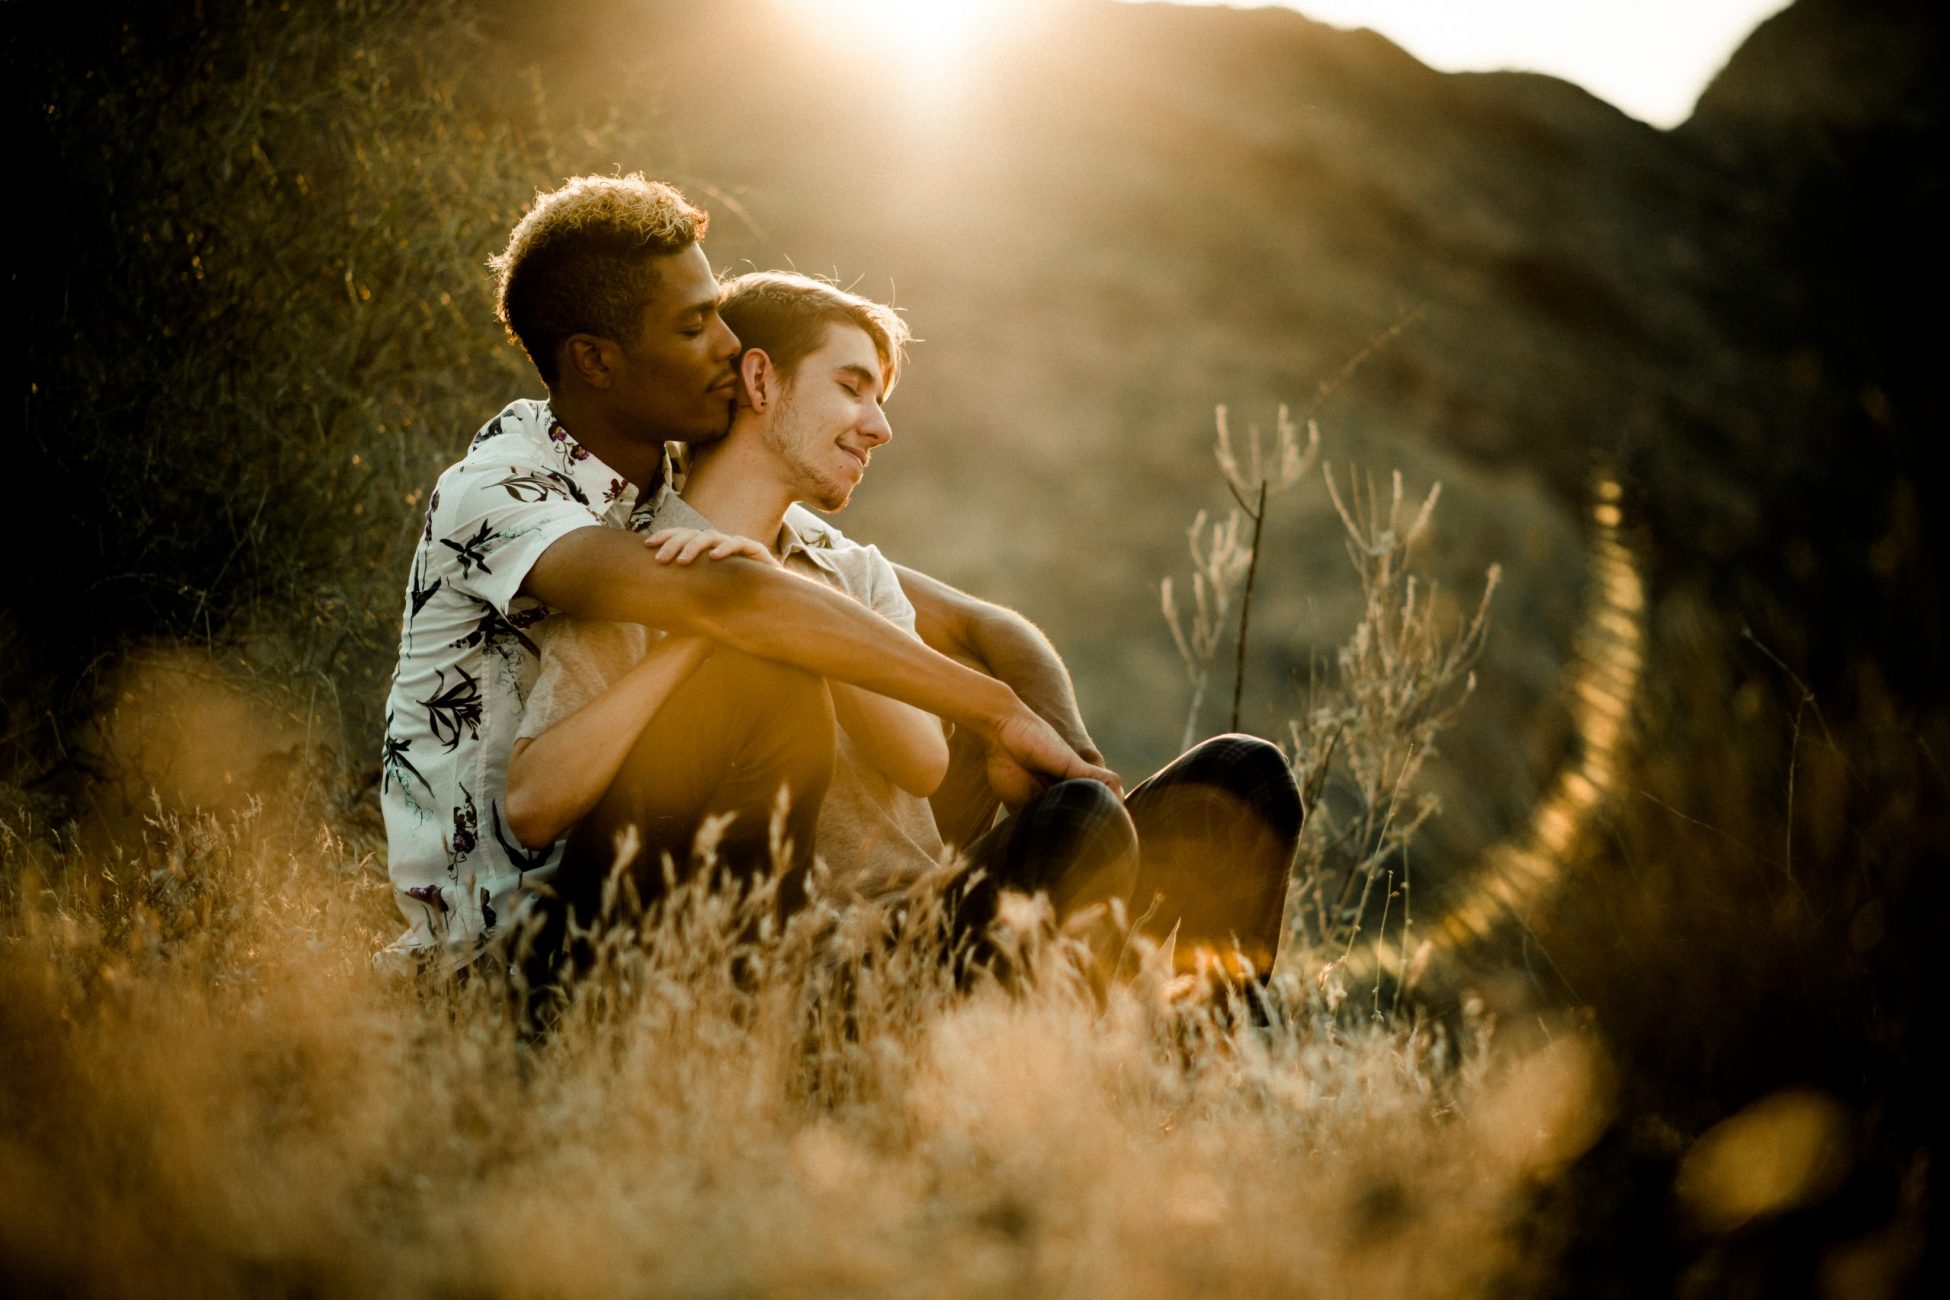 Gold Canyon lgbtq+ same sex couple engagement session in Arizona foothills during golden hour